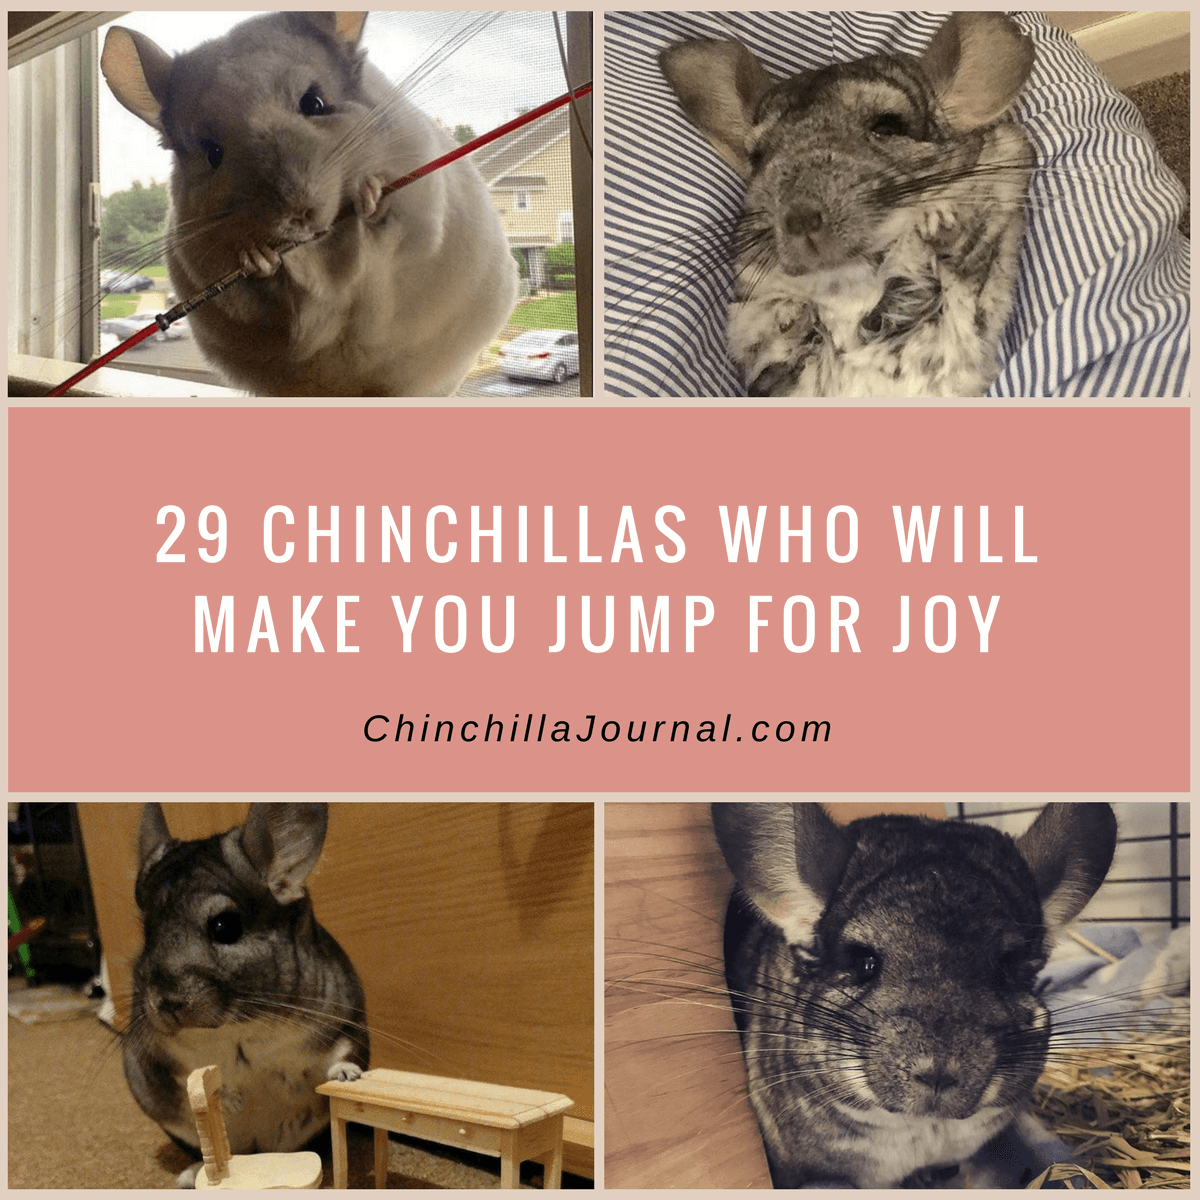 29 Chinchillas Who Will Make You Jump For Joy